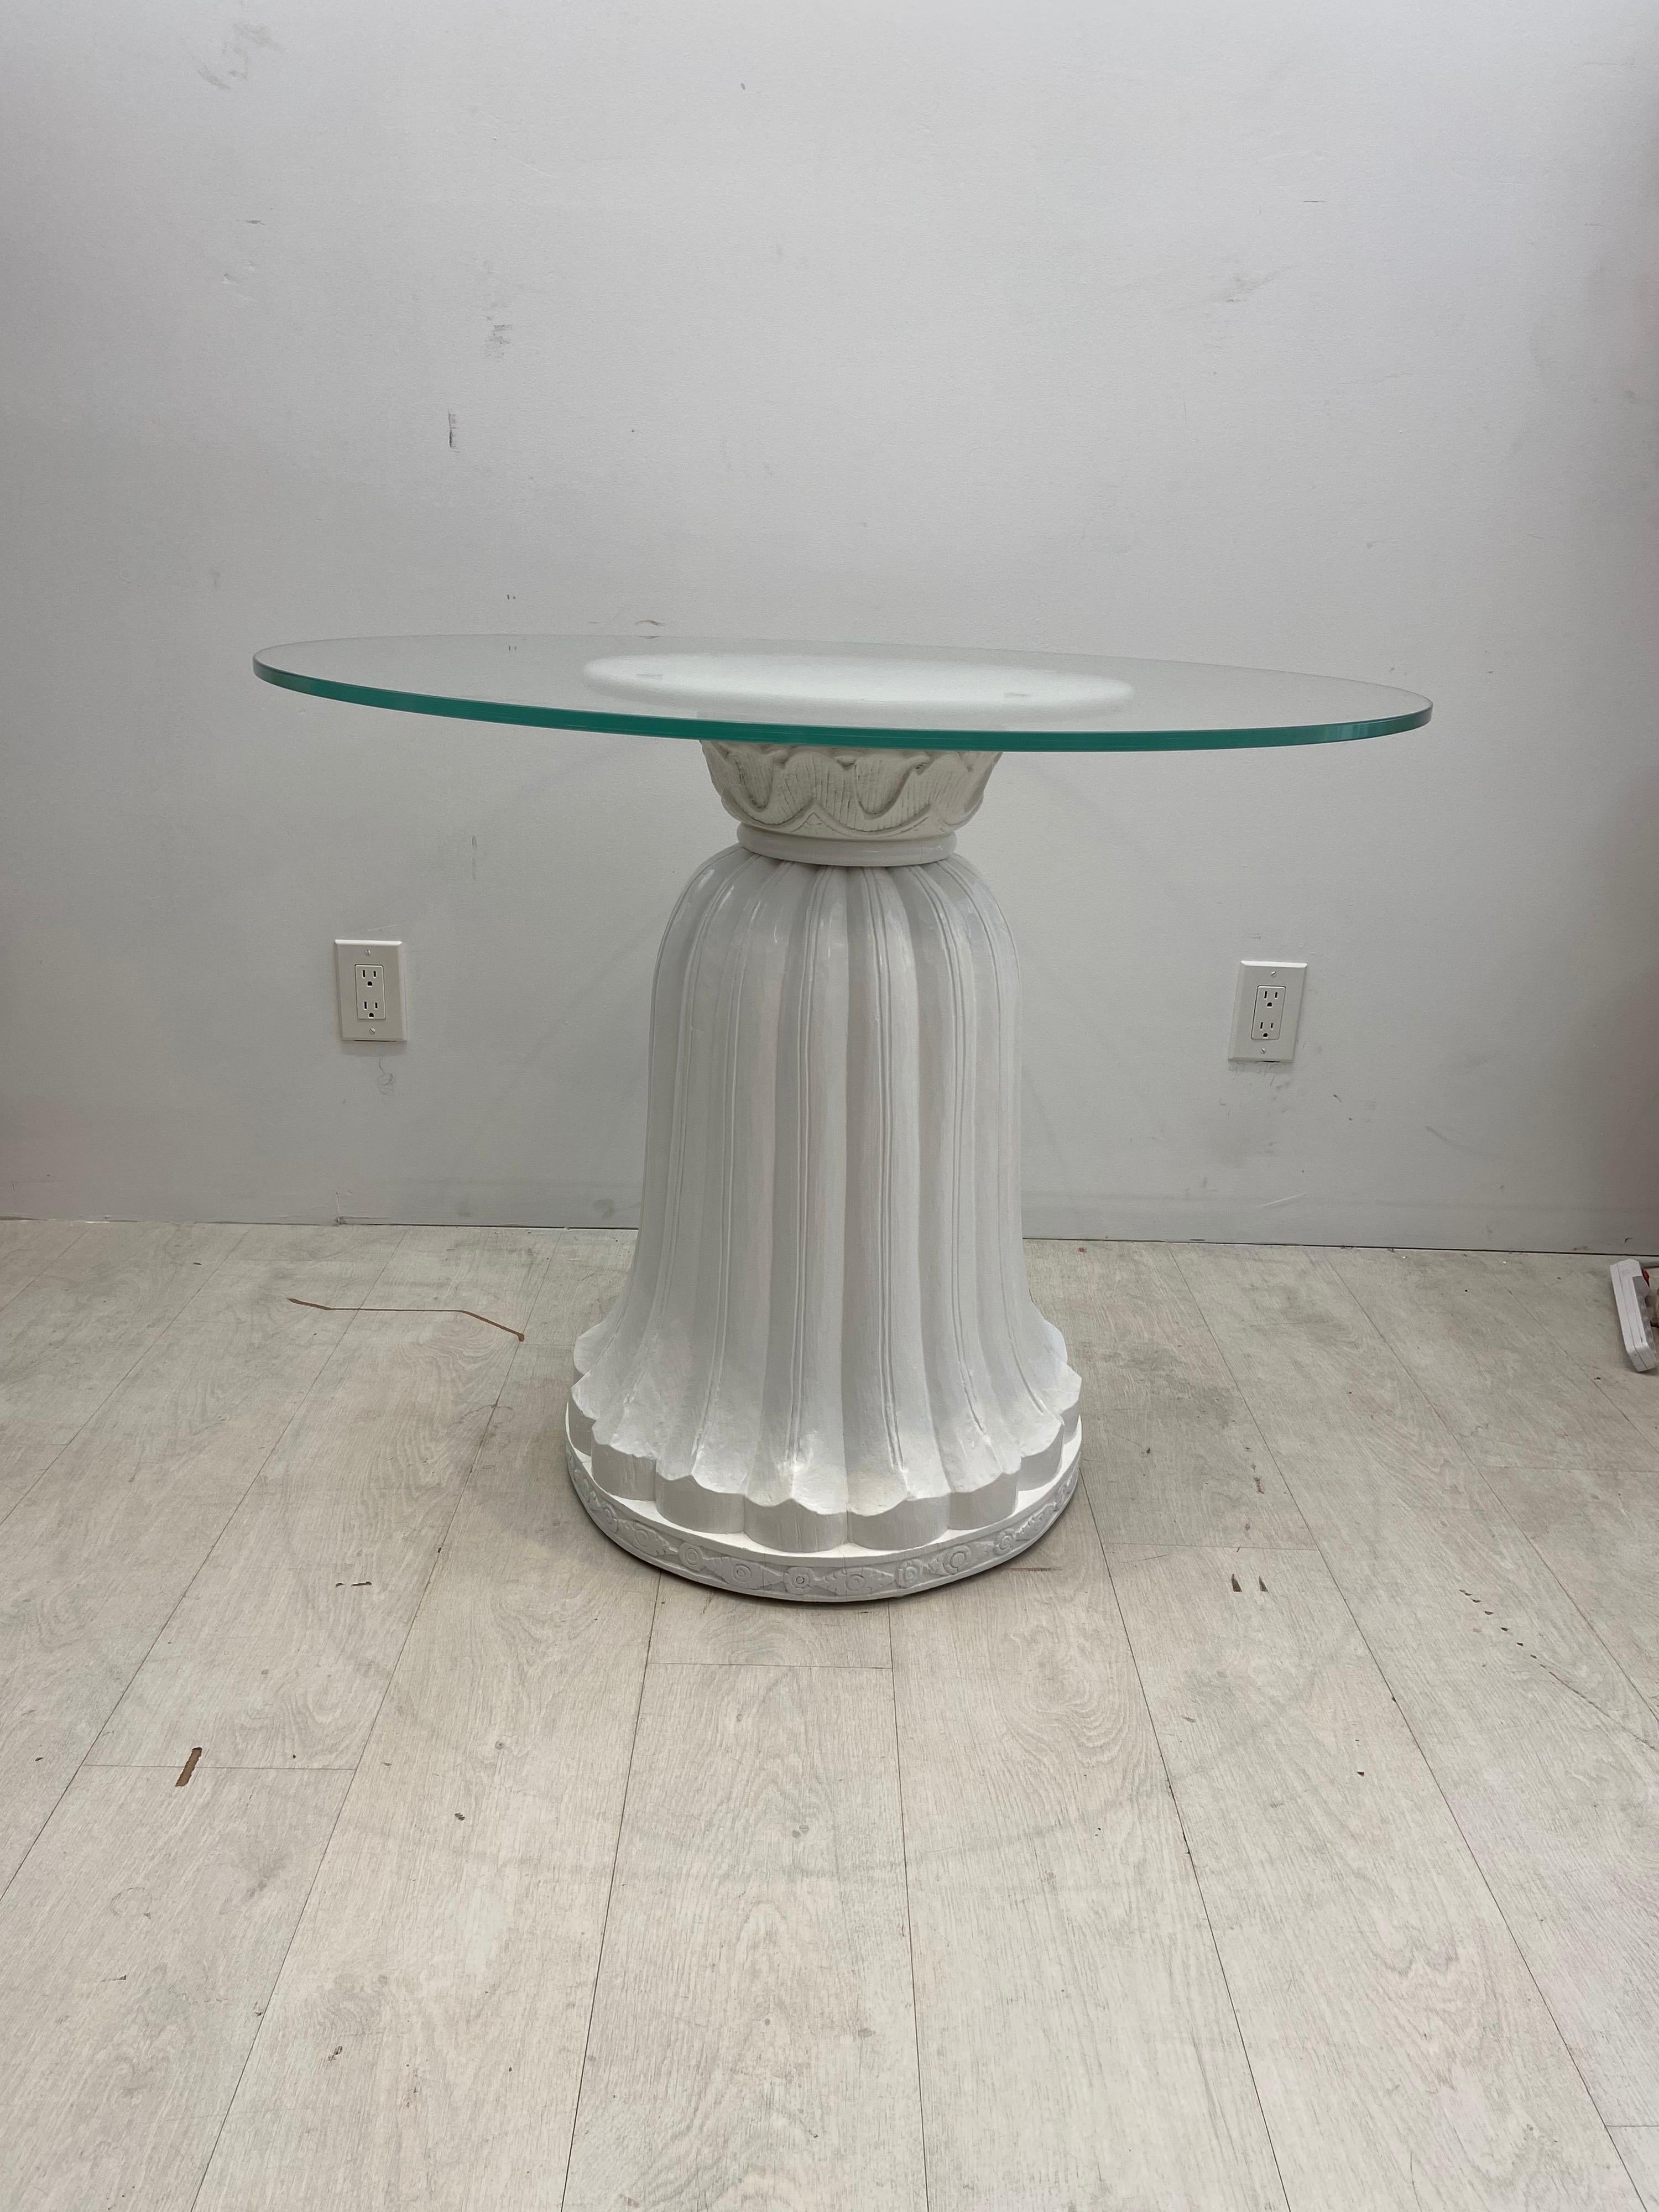 Hollywood Regency wood carved tassel table… Italian mid century… Lacquered in Hi gloss white…